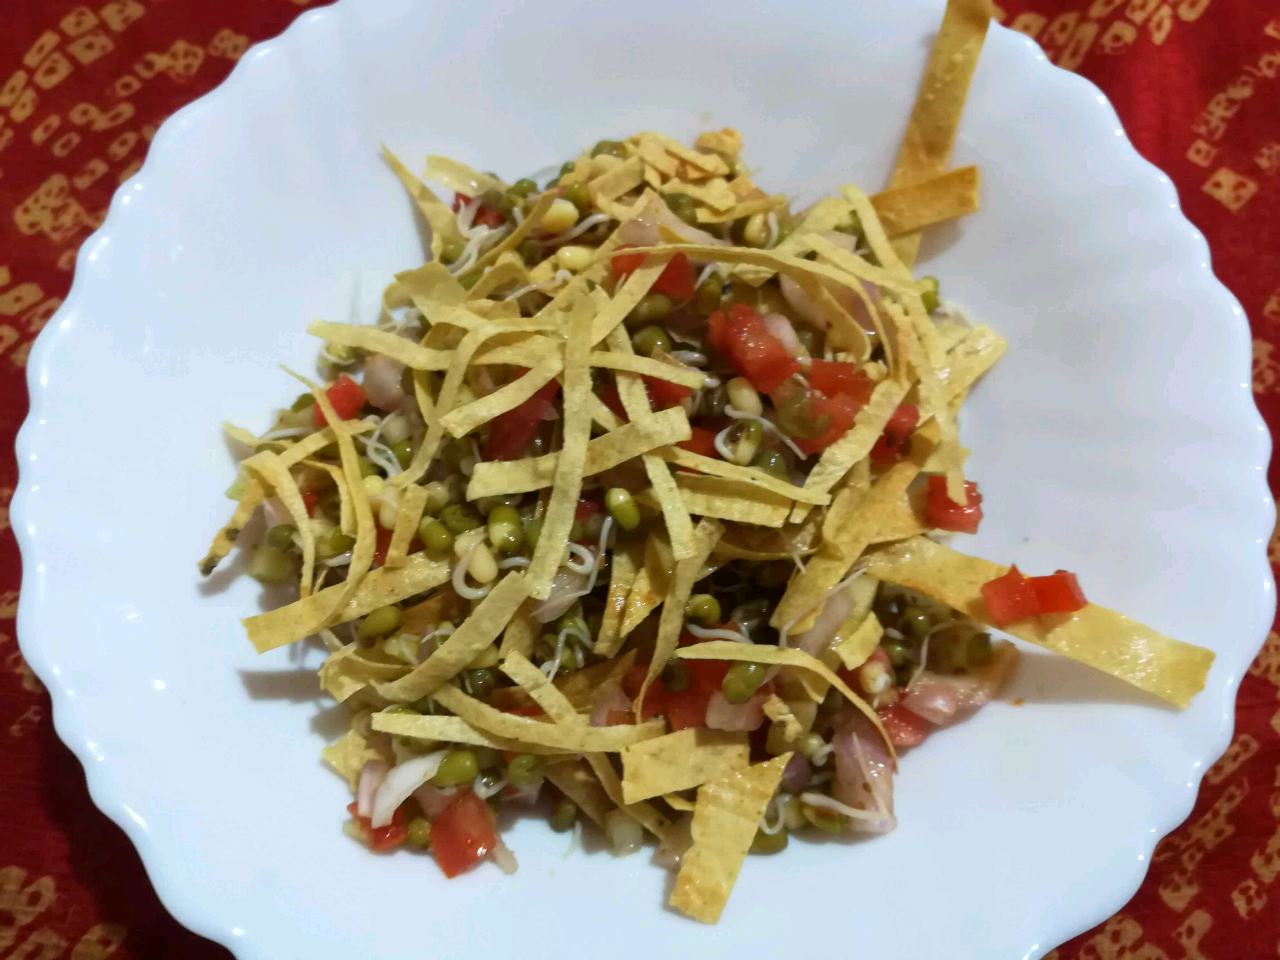 Sprouted Papad Bhel